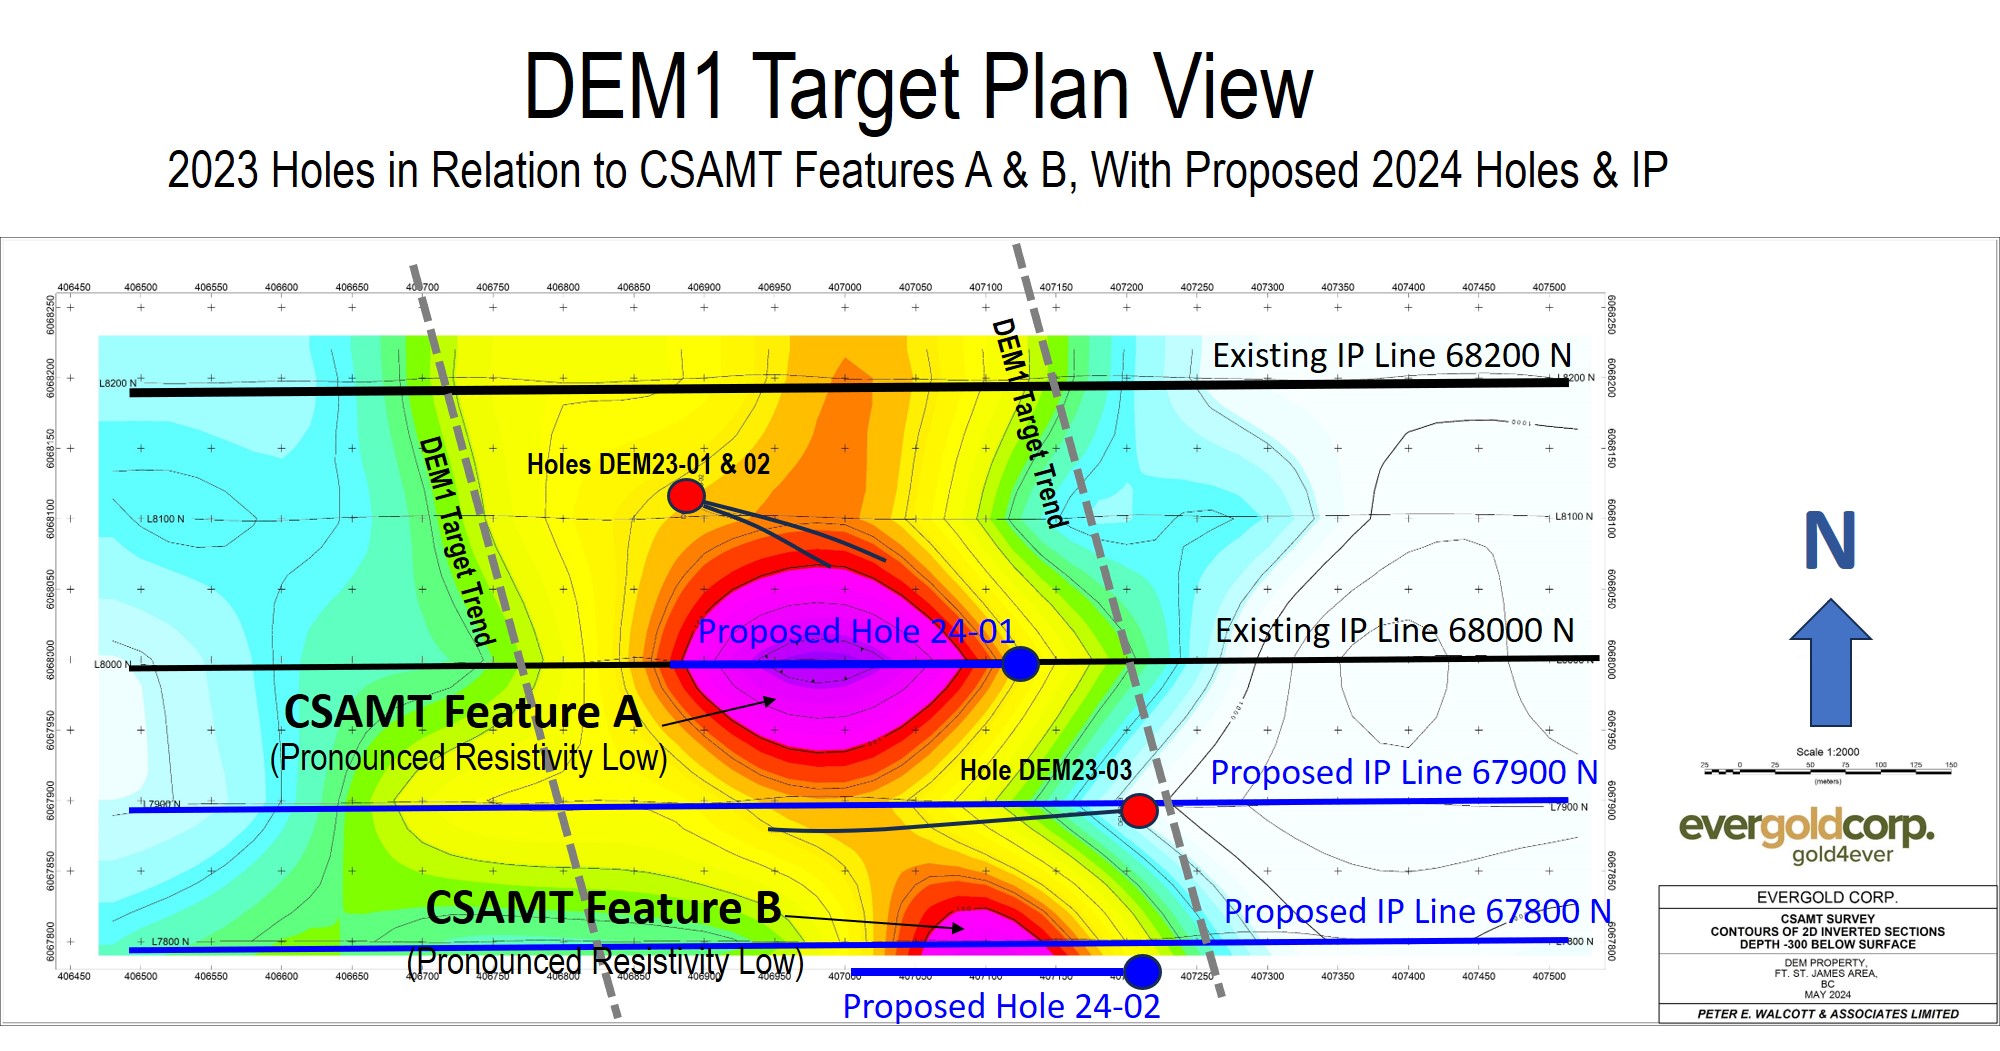 Figure 2 - DEM1 Prospect Plan View, 2023 Holes in Relation to CSAMT Features A & B, With Proposed 2024 Holes & IP